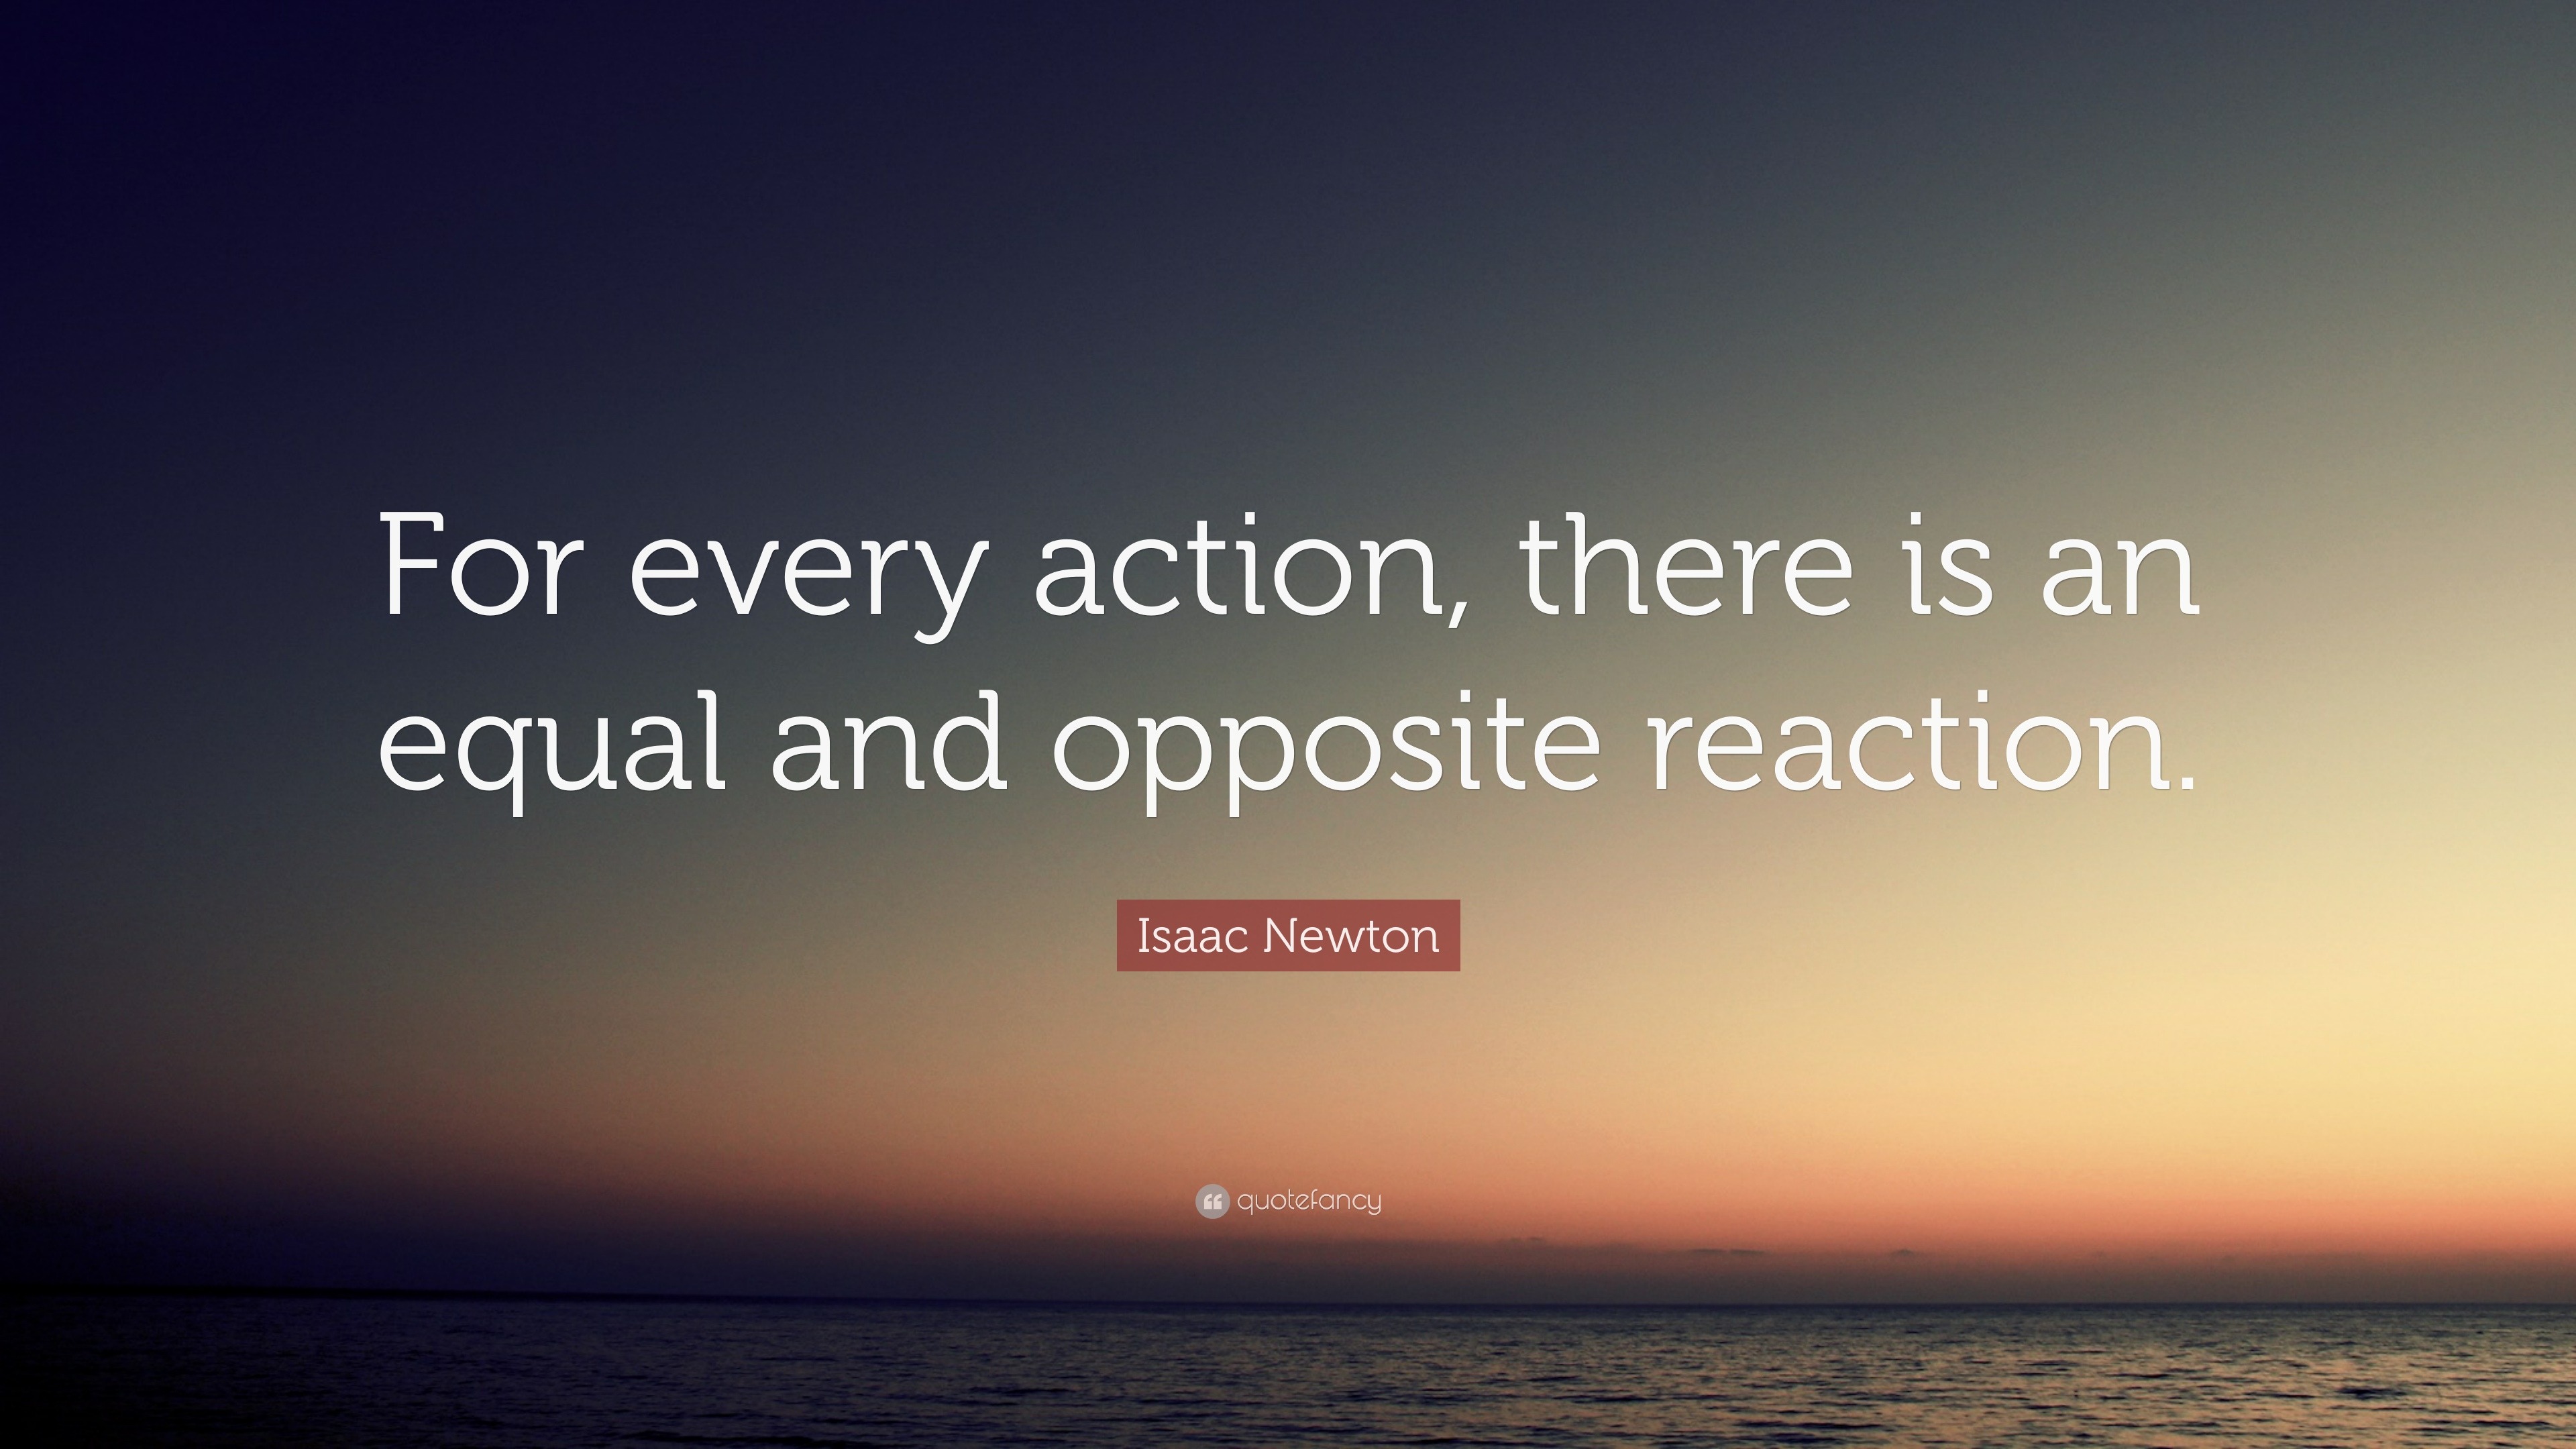 Isaac Newton Quote: “For every action, there is an equal and opposite